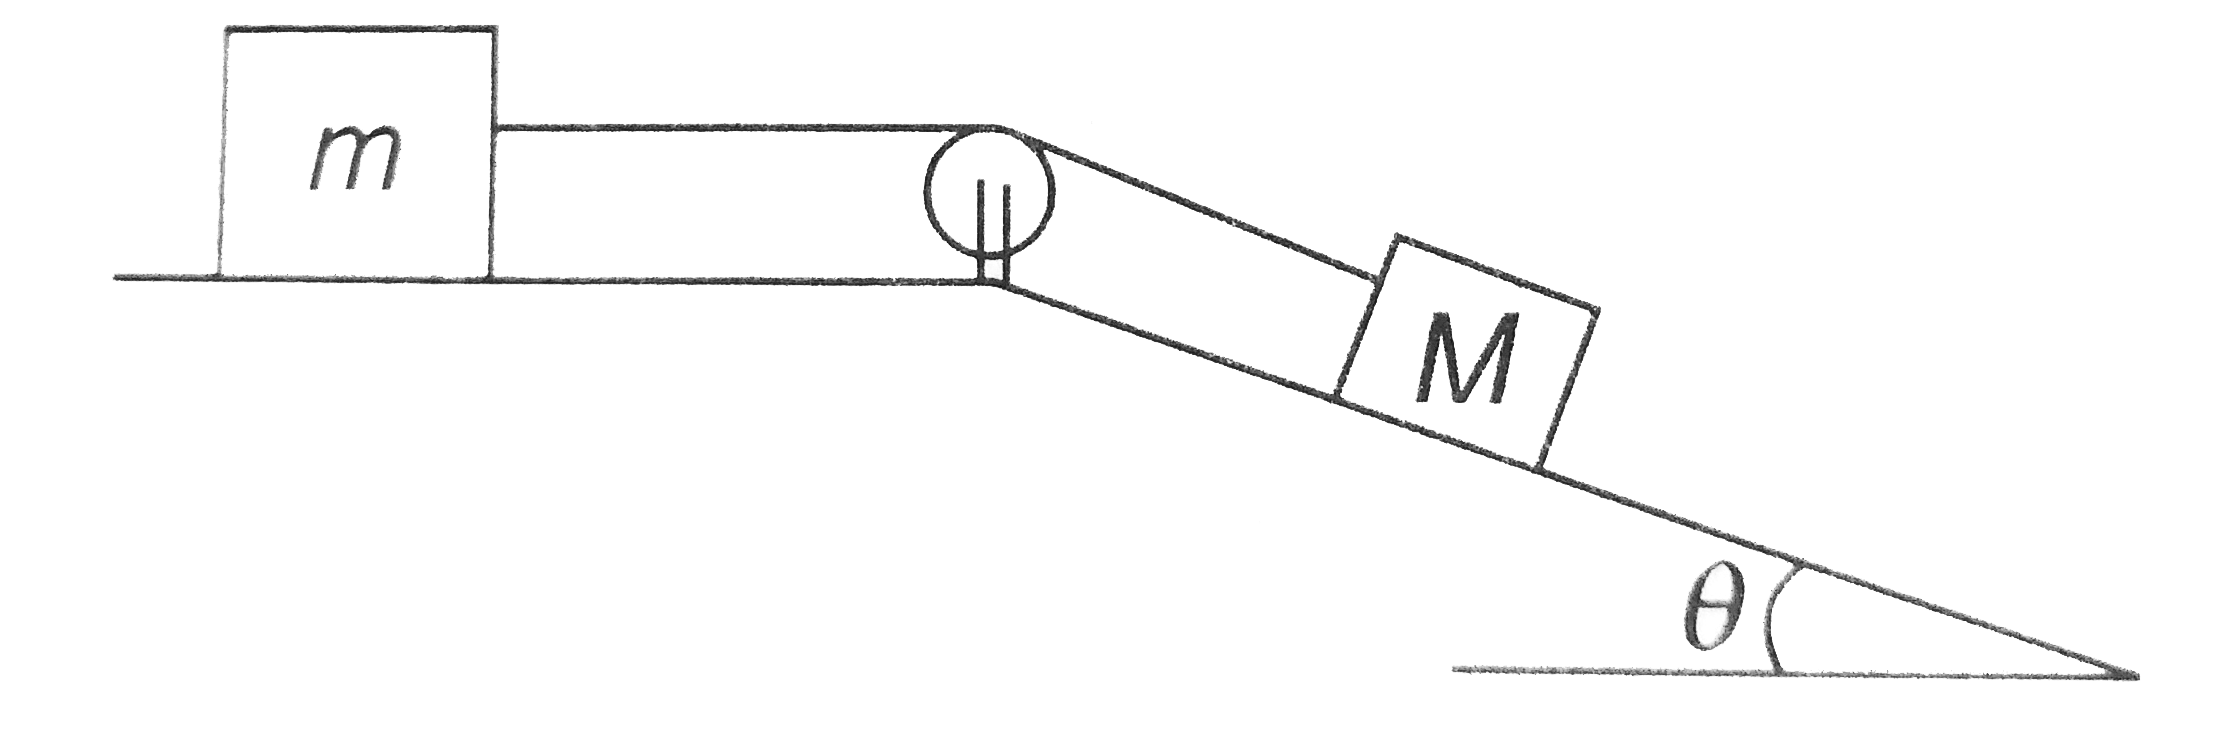 Find the maximum value of (m//m) in the situation shown in figure so that the system remains at rest. Friction coefficient of both the contacts is mu , string is massless an pulley is friction less.